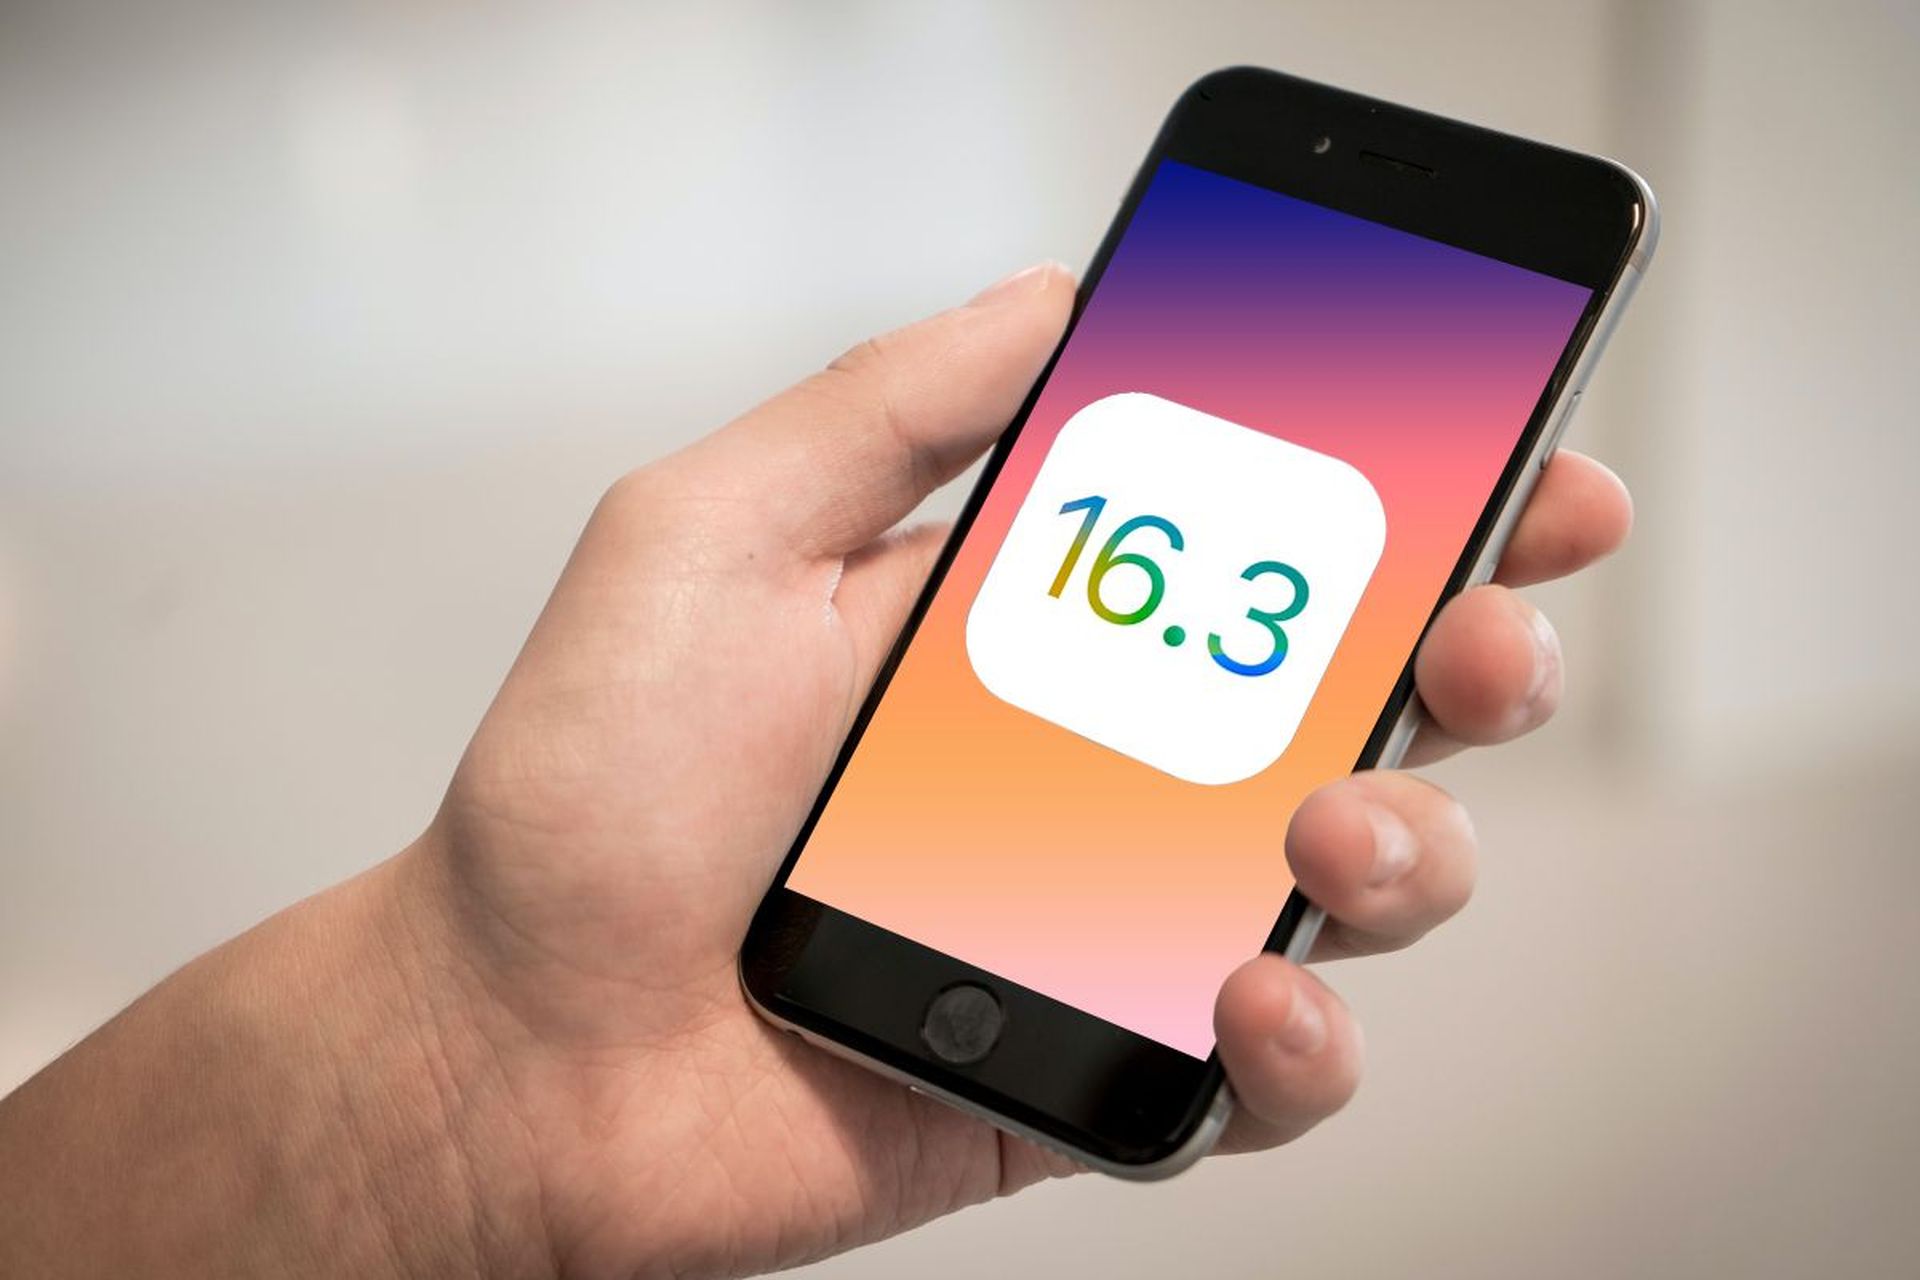 iOS 16.3 public beta is out: What are the new features?